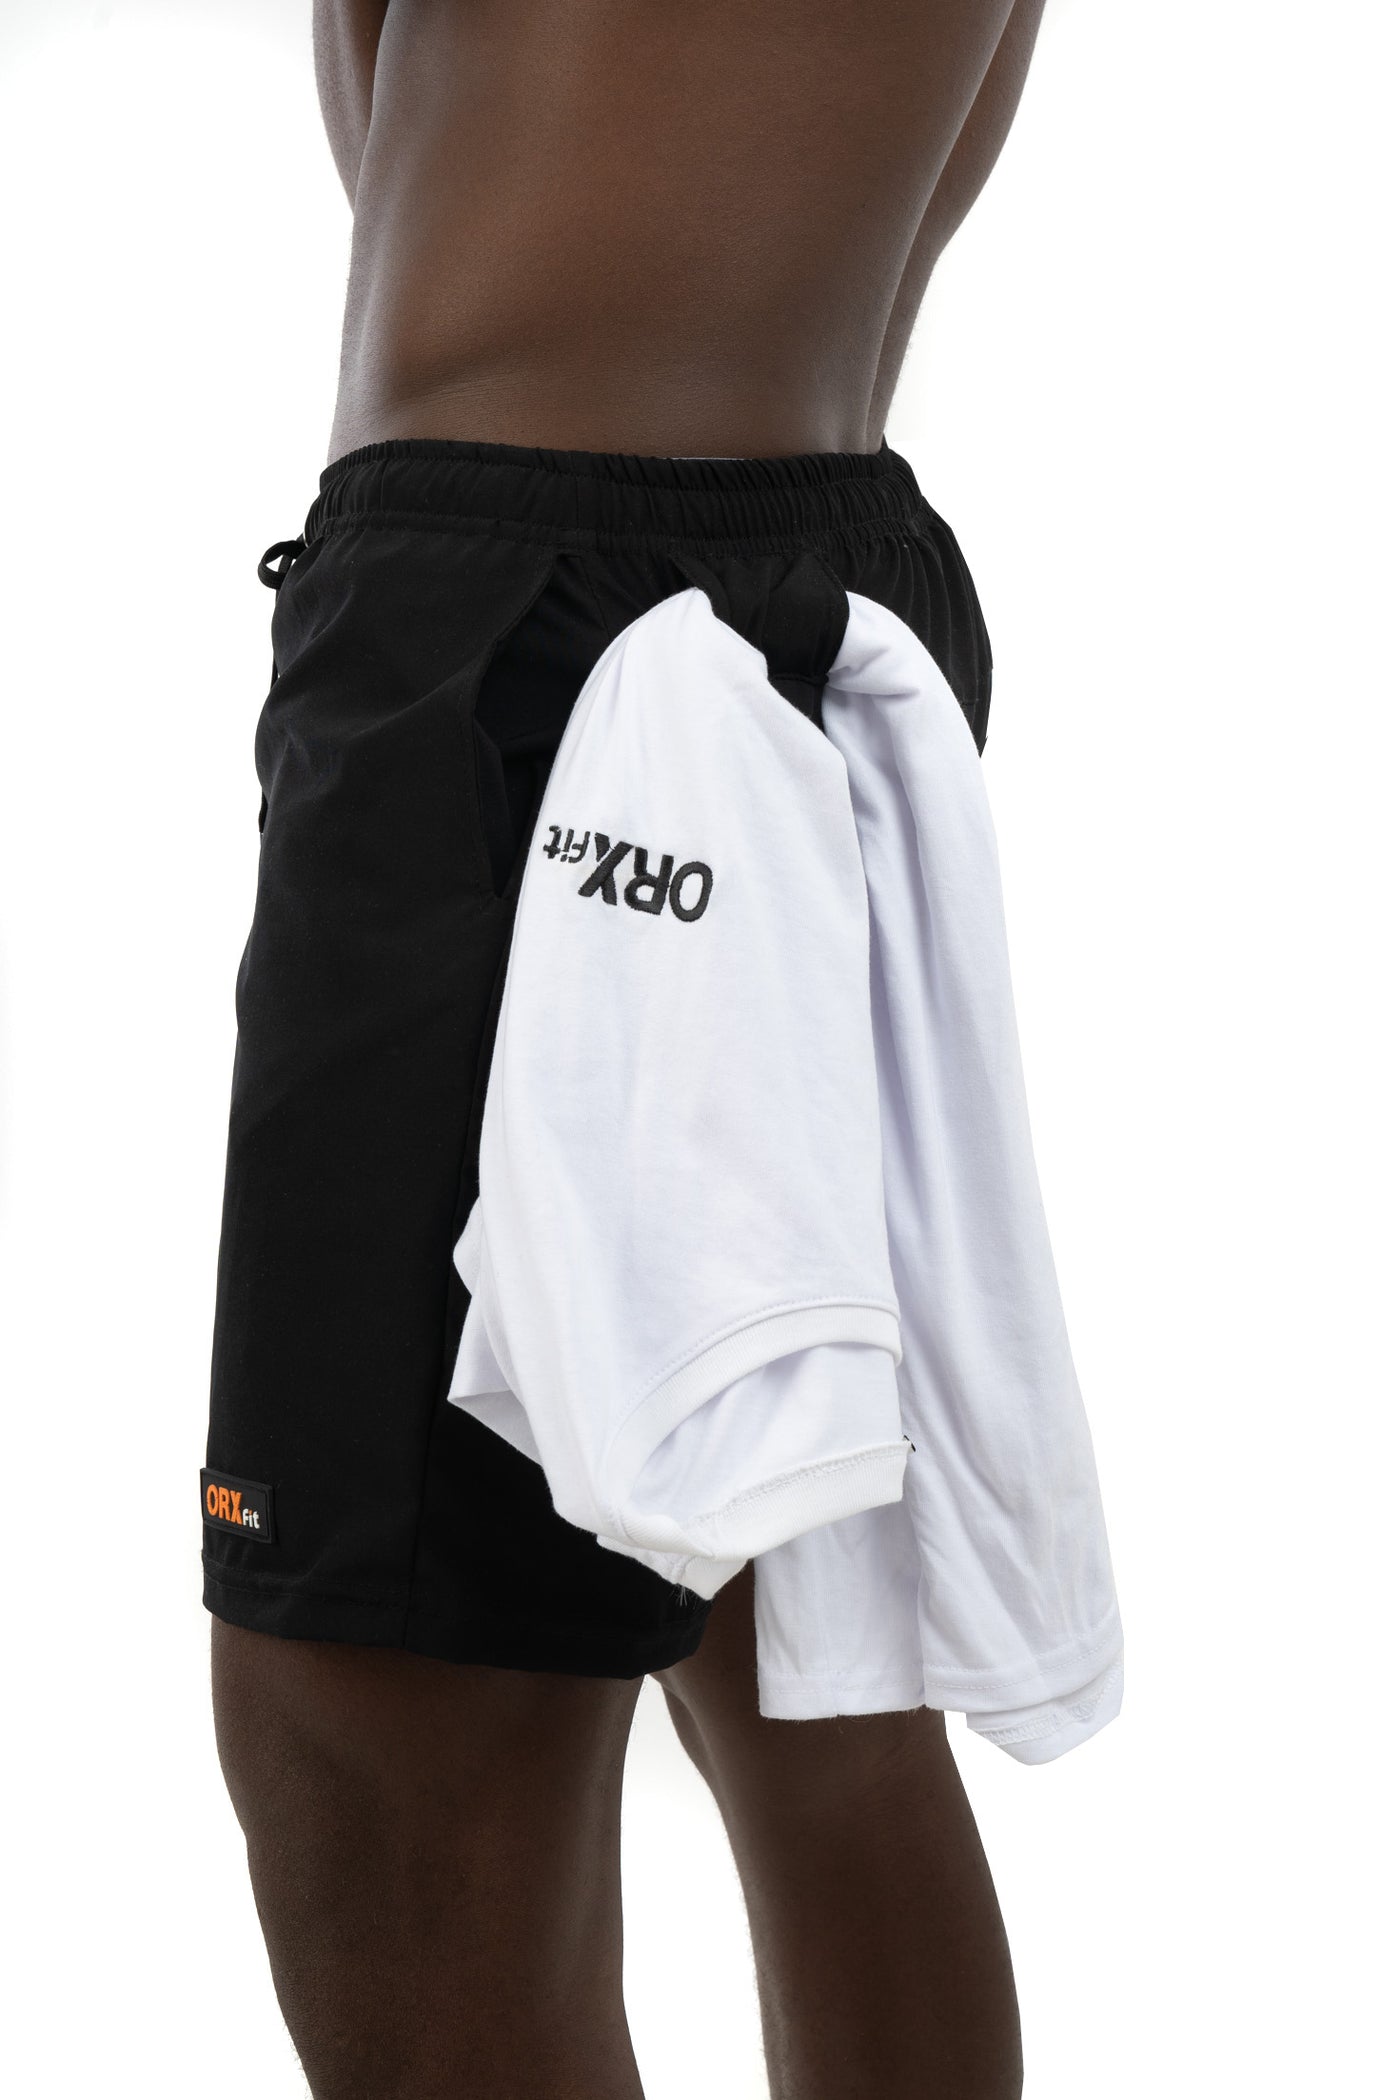 Shorts Radical Times Classic (Con Lycra)